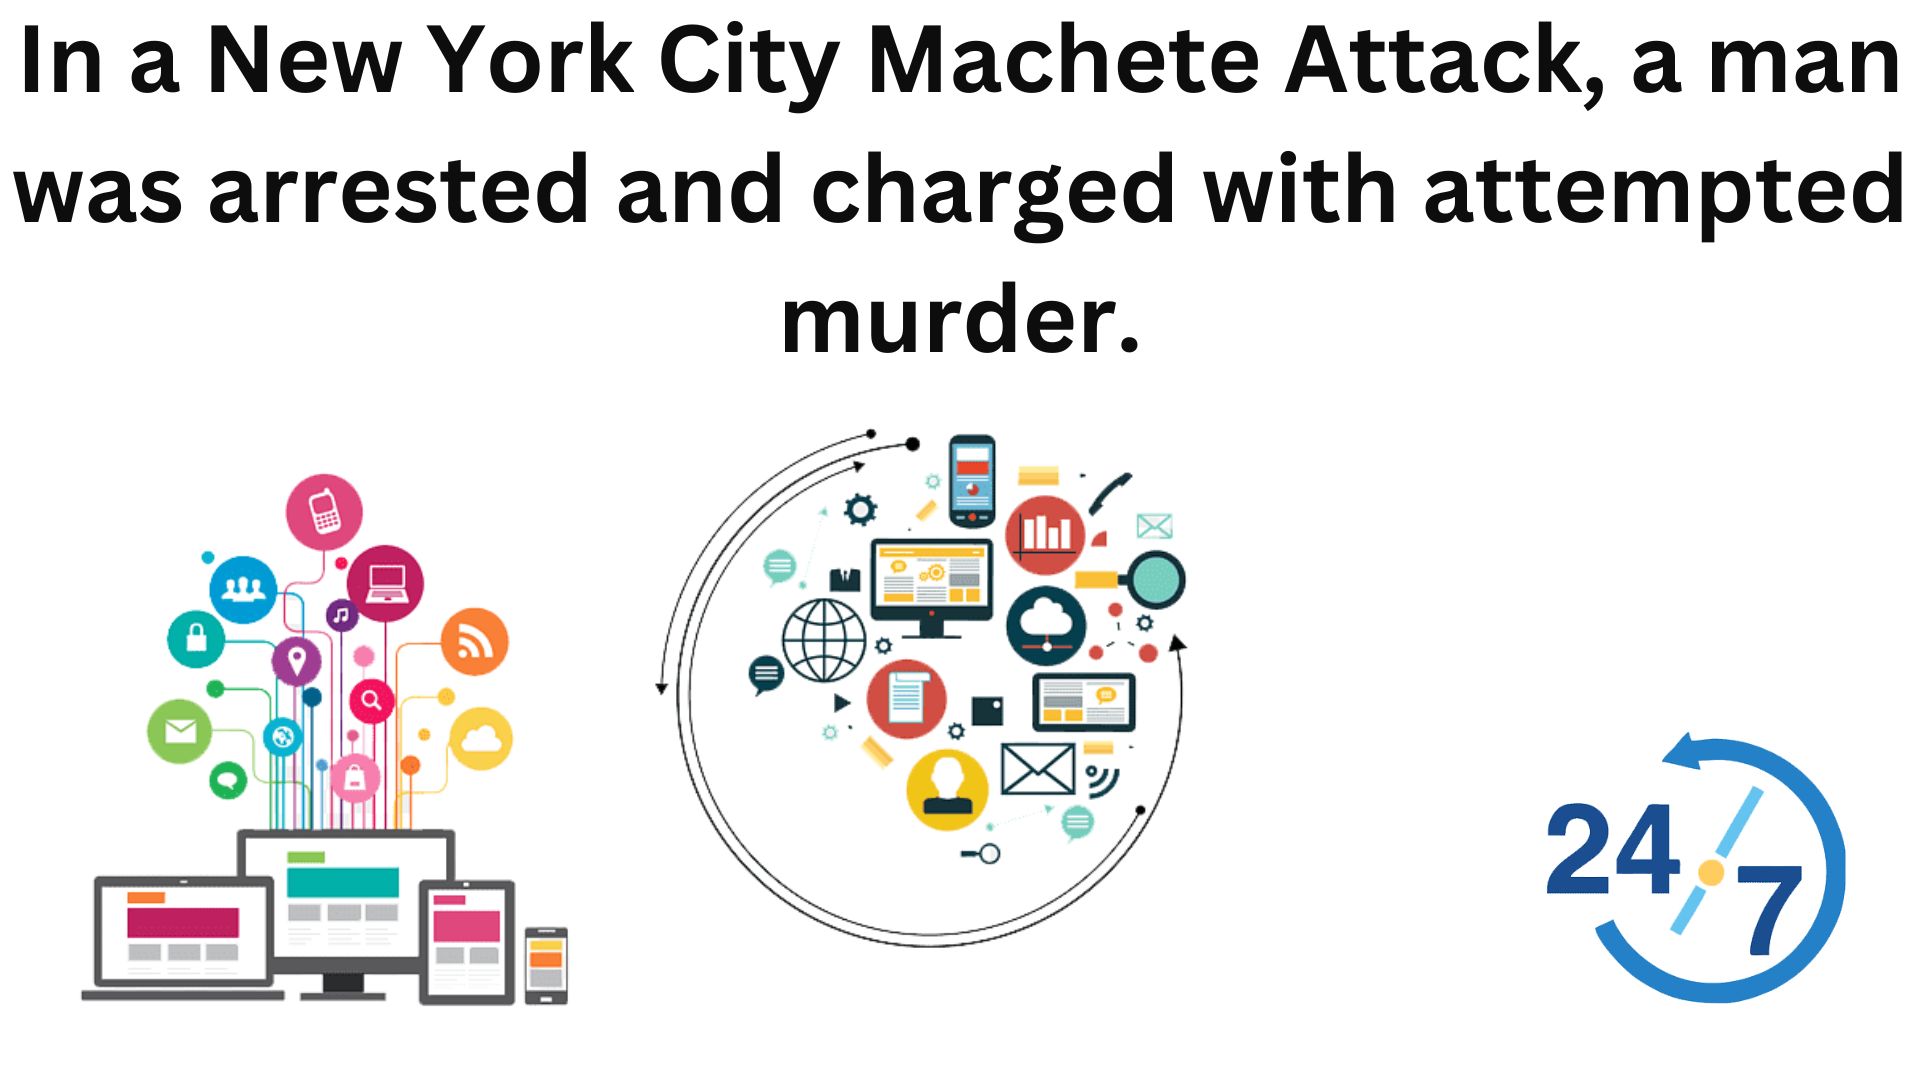 In a new york city machete attack, a man was arrested and charged with attempted murder.